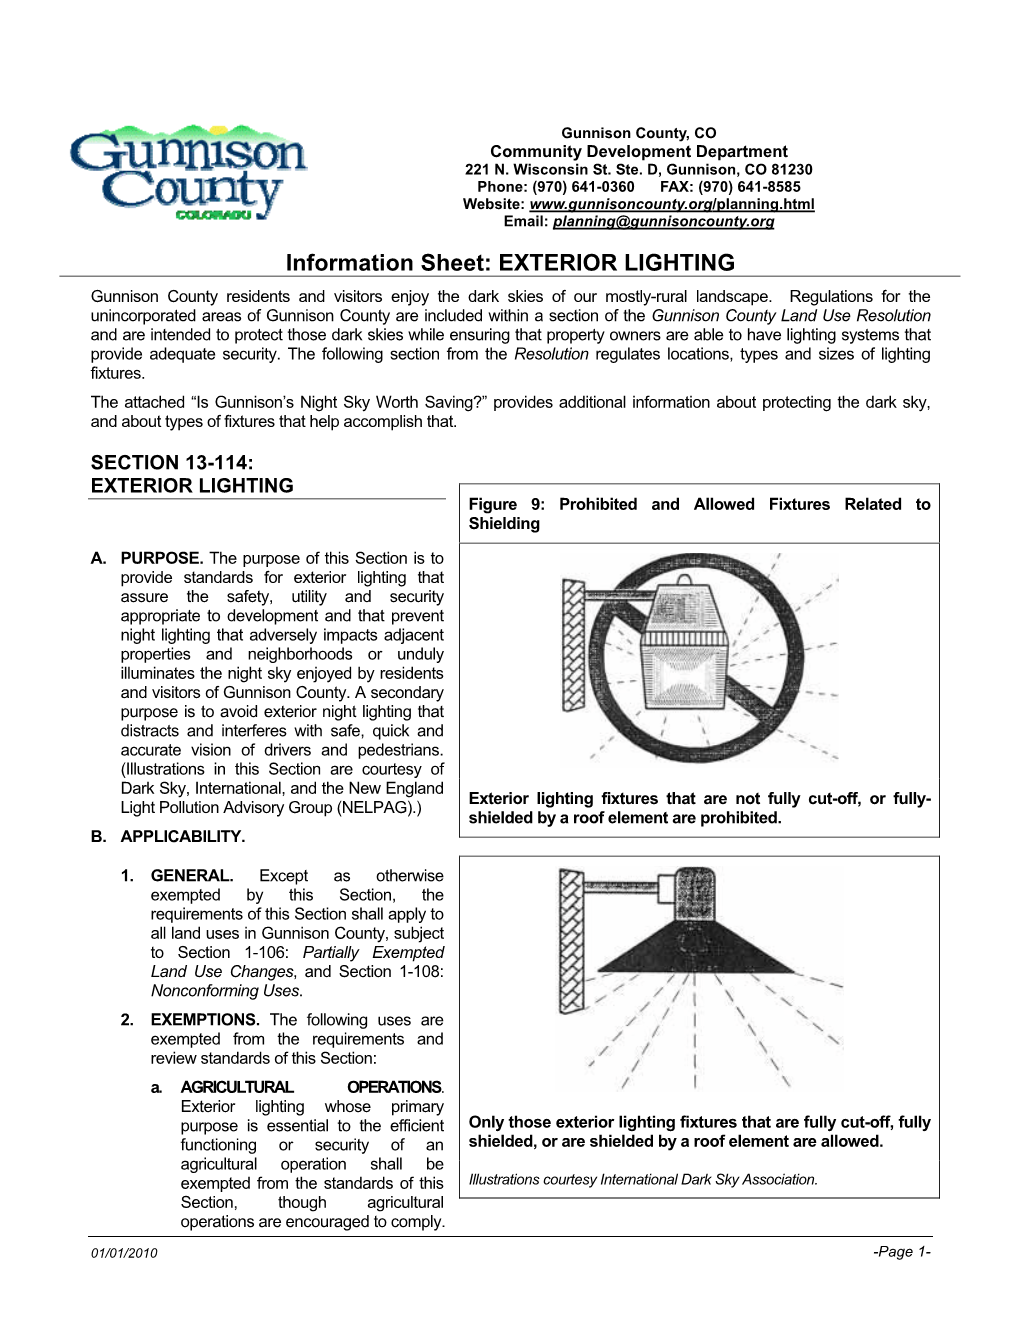 Information Sheet: EXTERIOR LIGHTING Gunnison County Residents and Visitors Enjoy the Dark Skies of Our Mostly-Rural Landscape